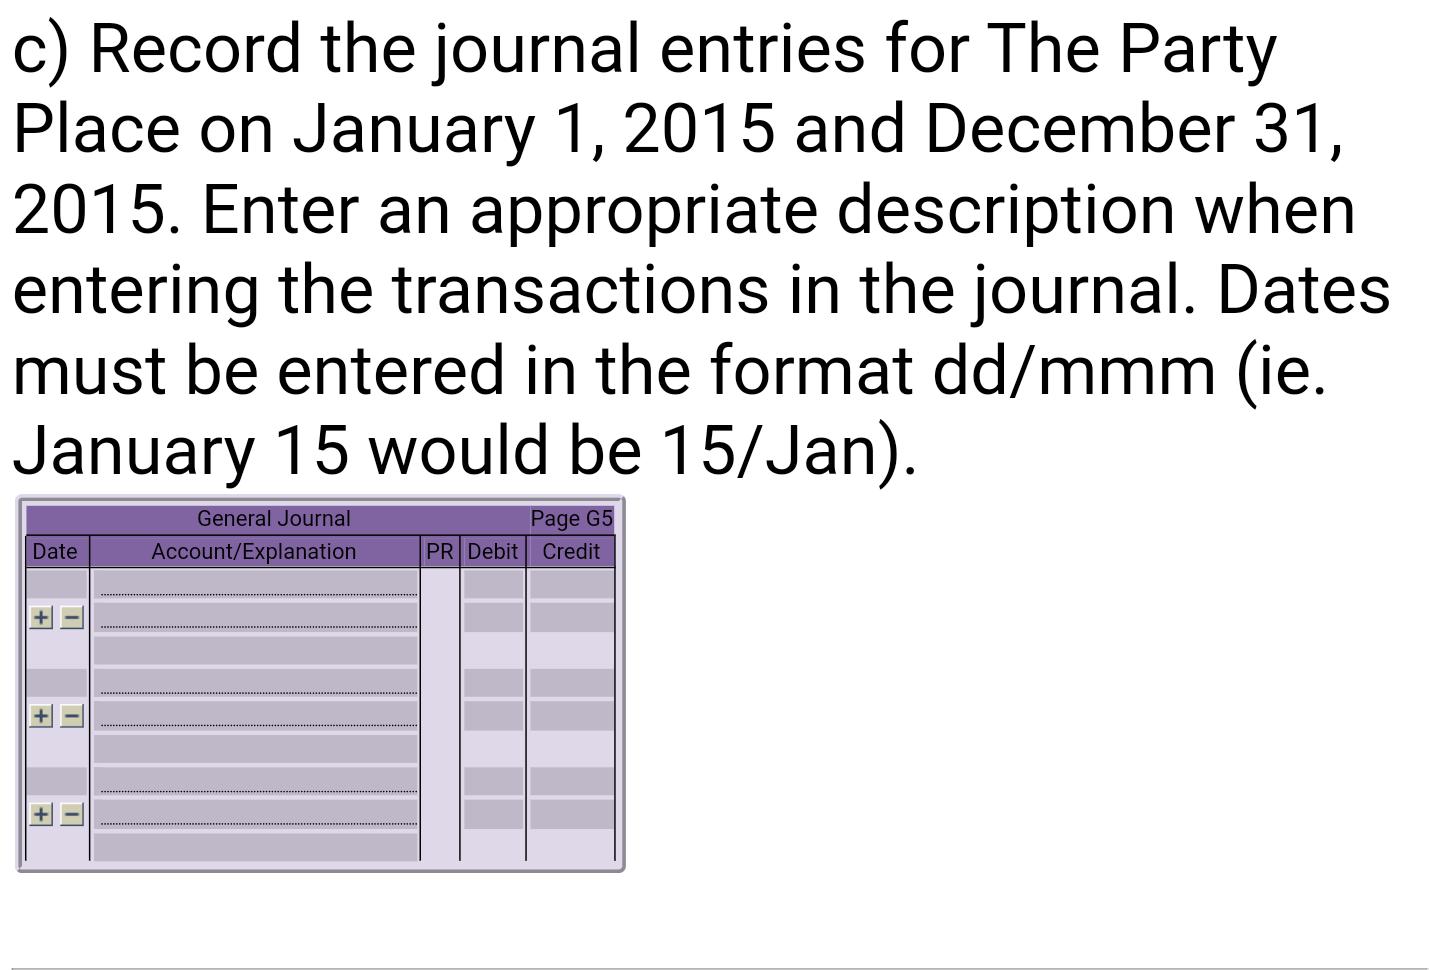 c) Record the journal entries for The Party Place on January 1, 2015 and December 31, 2015. Enter an appropriate description